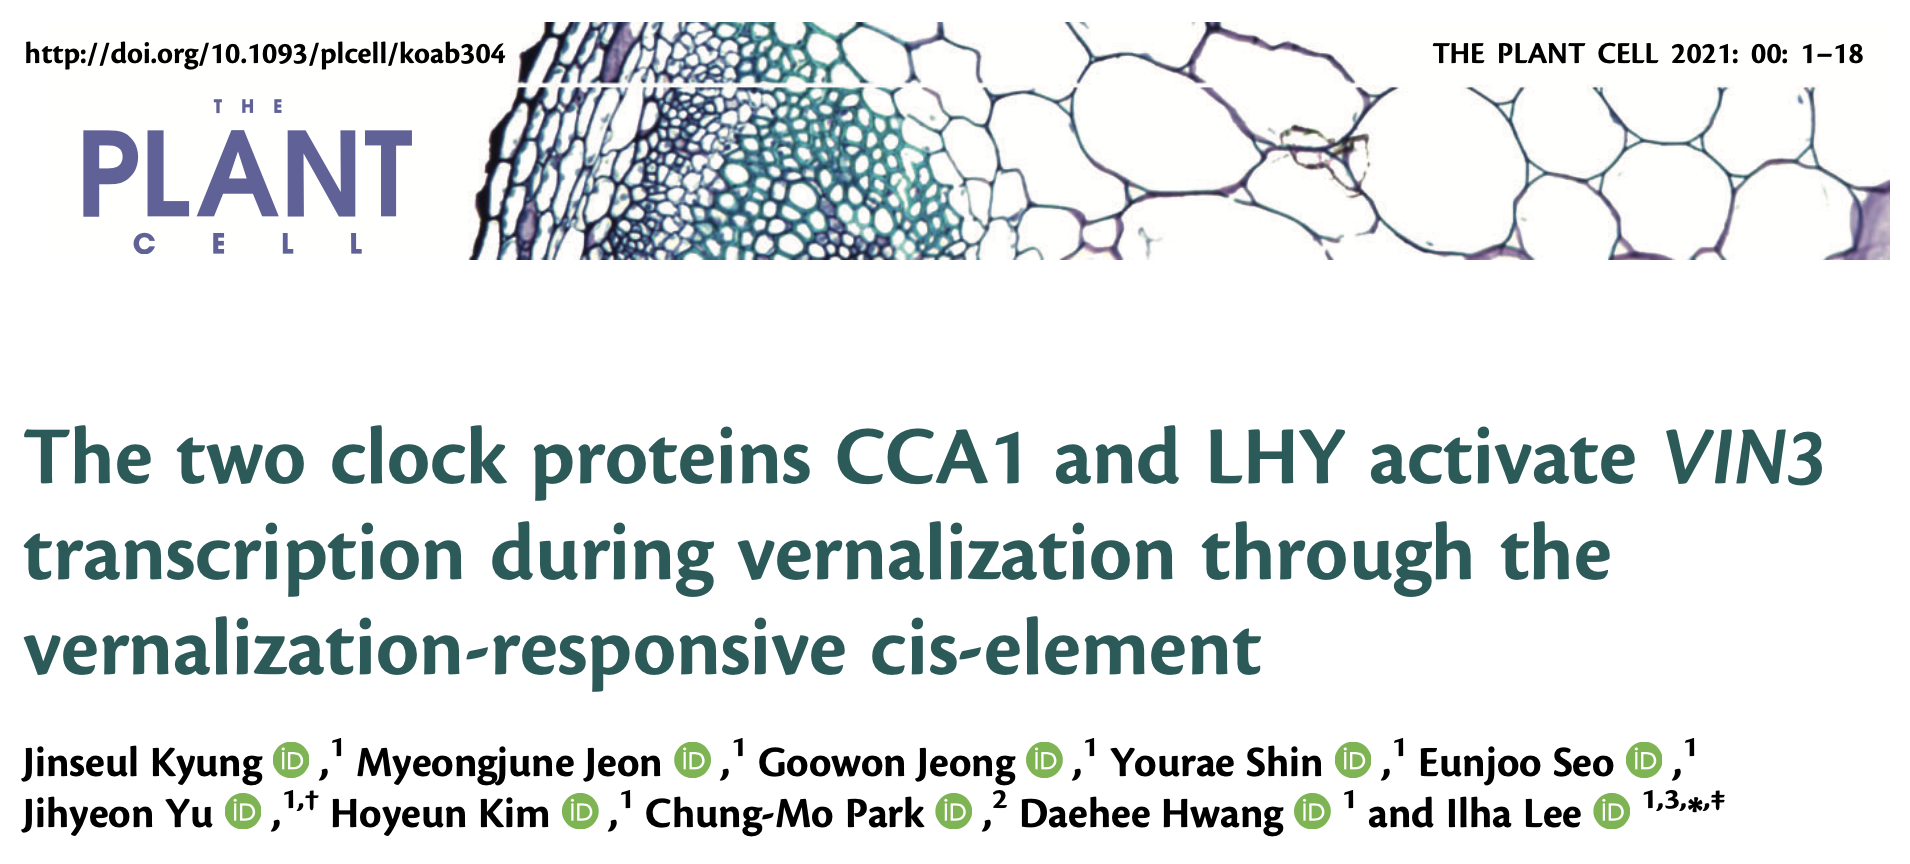 The two clock proteins CCA1 and LHY activate VIN3 transcription during vernalization through the vernalization-responsive cis-element